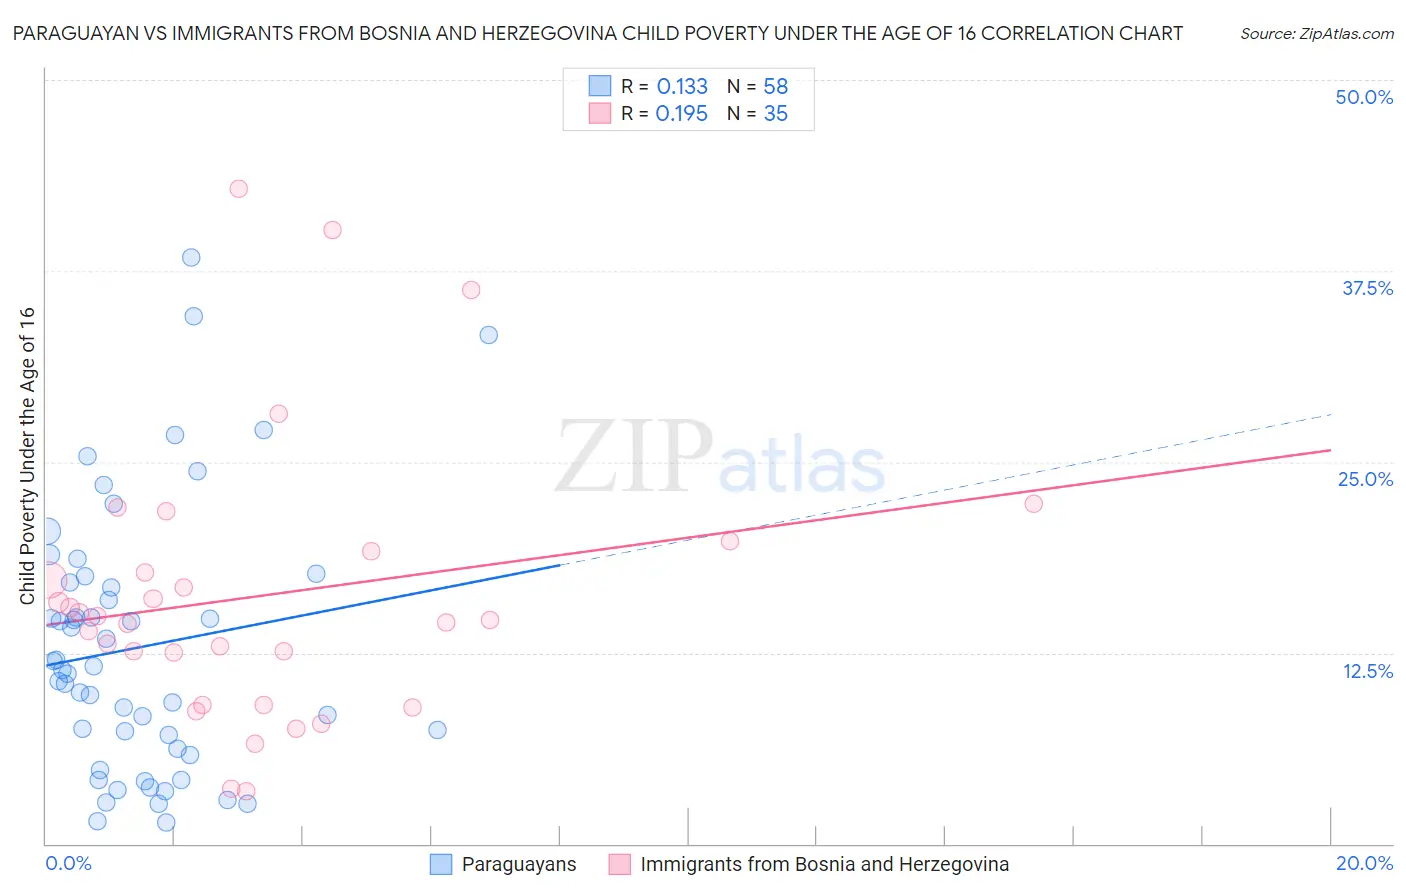 Paraguayan vs Immigrants from Bosnia and Herzegovina Child Poverty Under the Age of 16